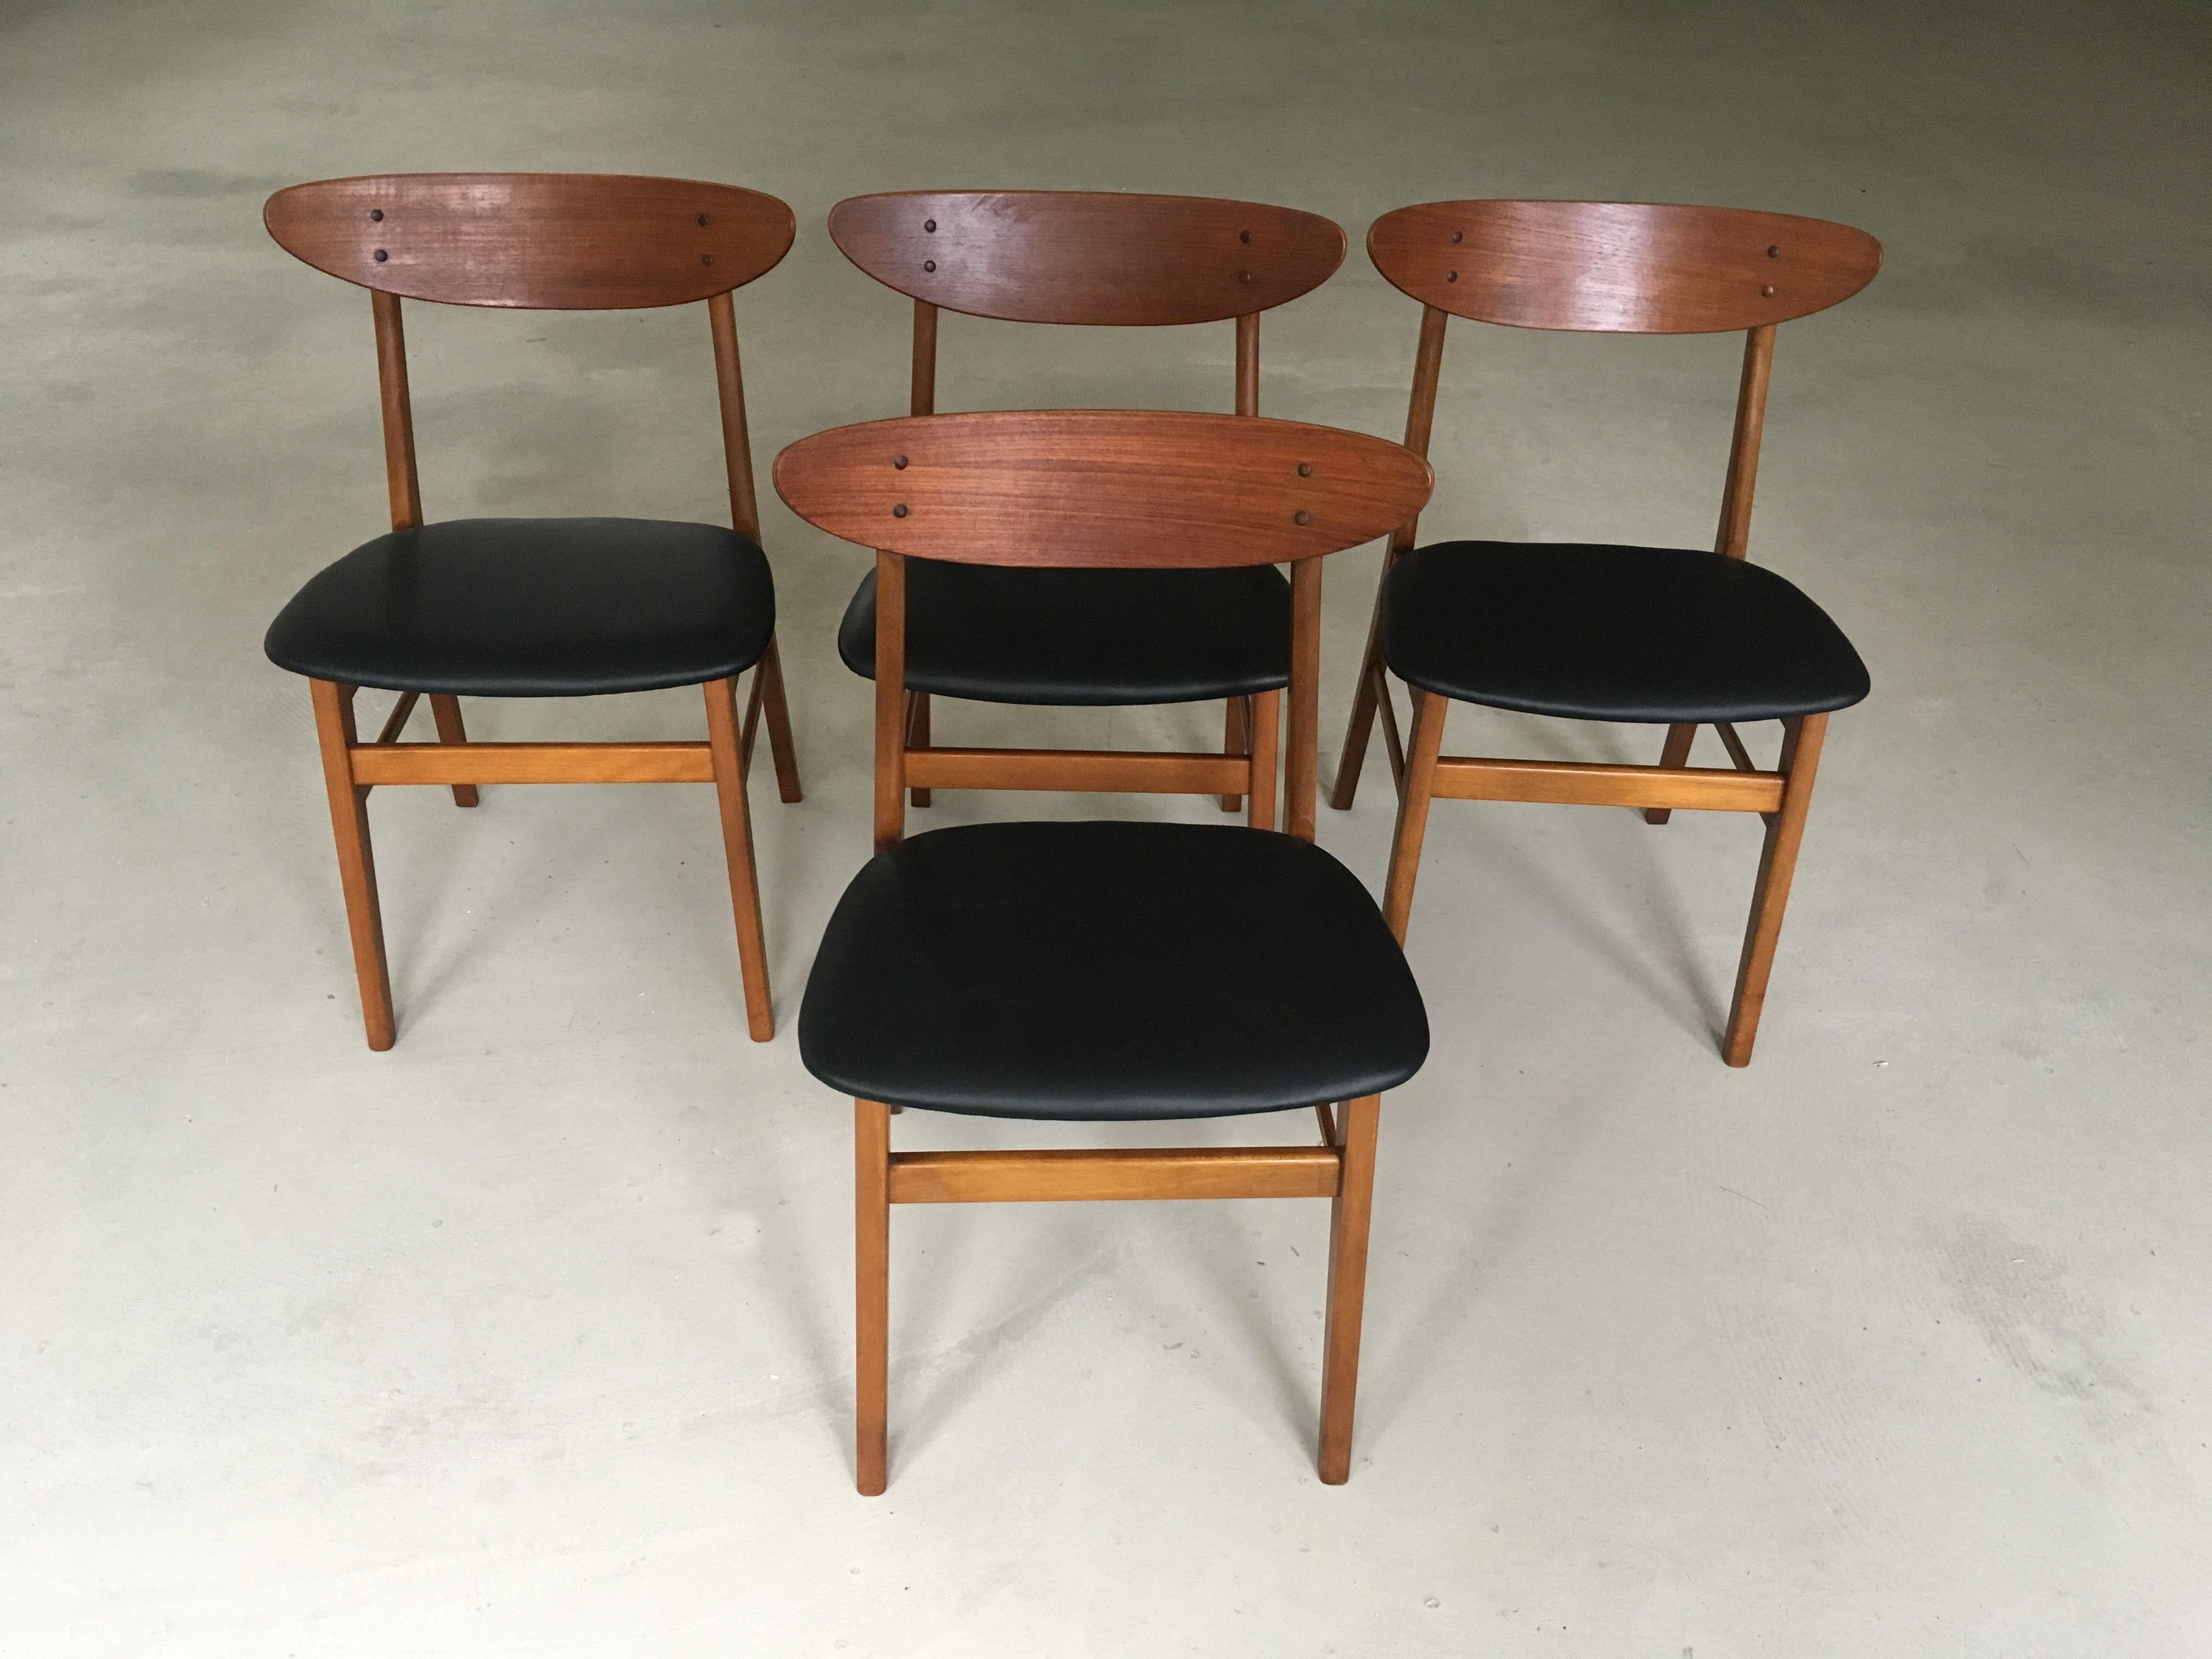 Set of 4 Th. Harlev dining chairs, model 210 - nicknamed 